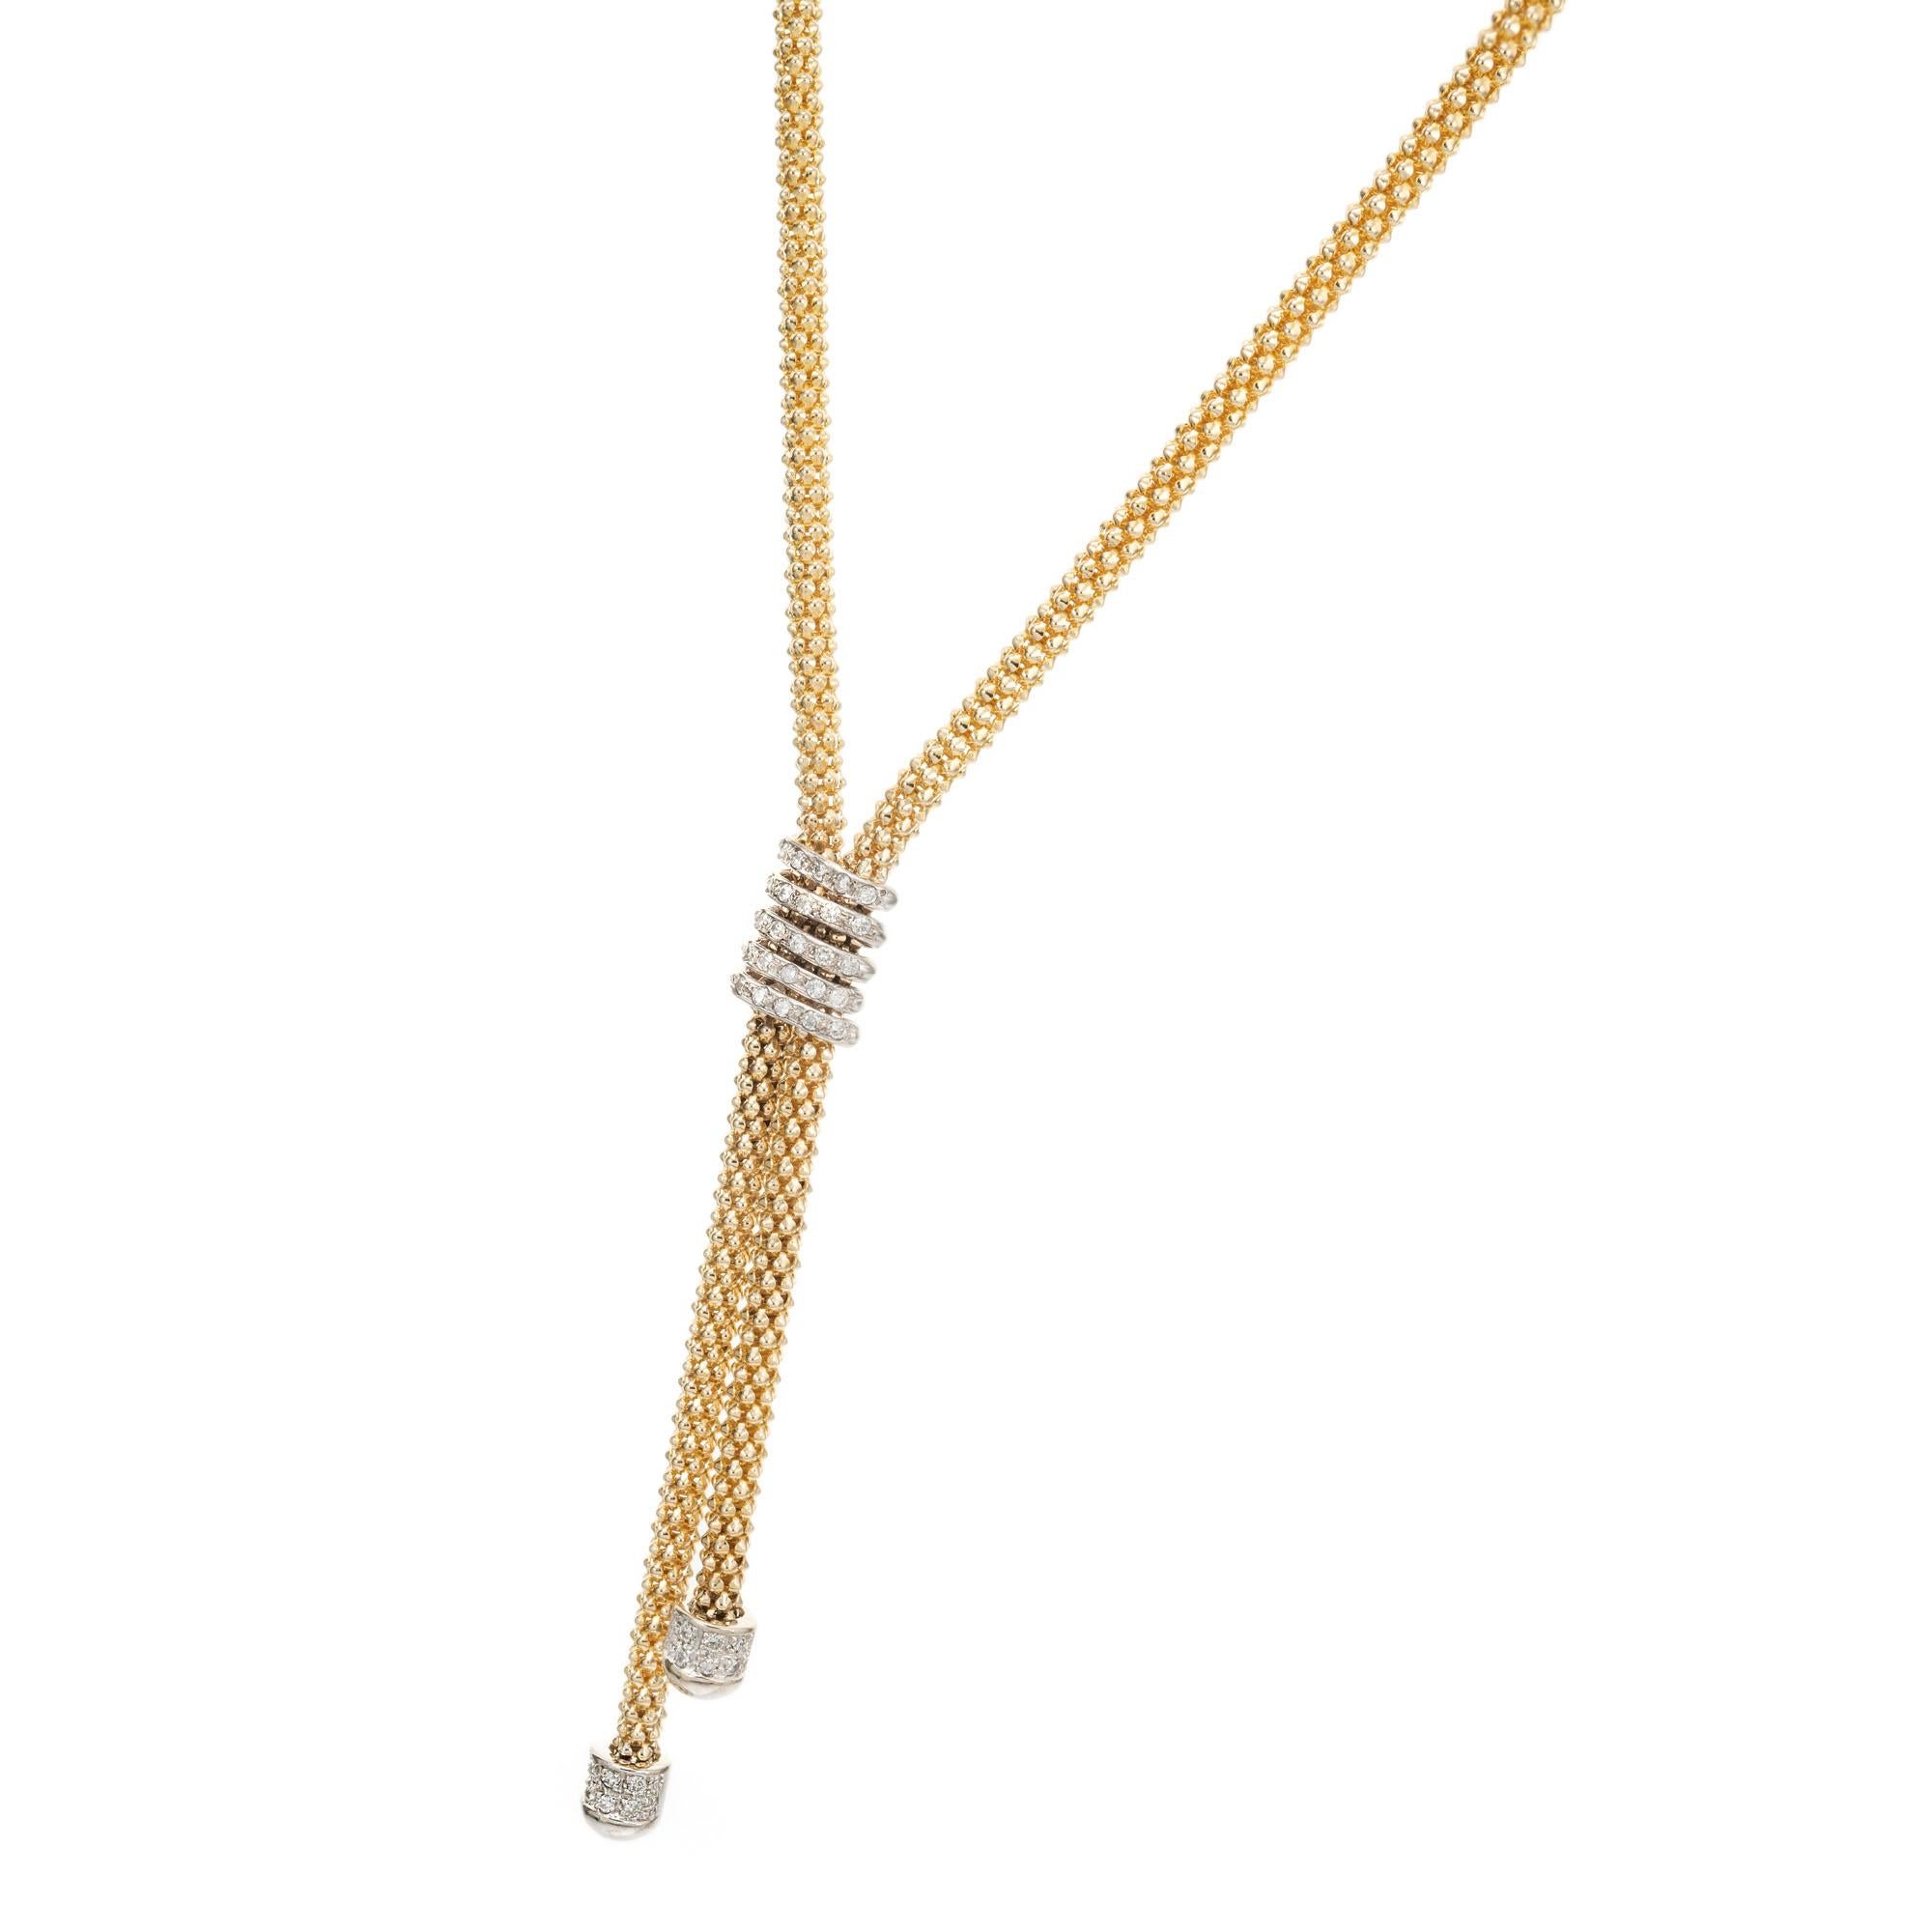 Round Cut .62 Carat Diamond Two-Tone Gold Lariat Style Necklace